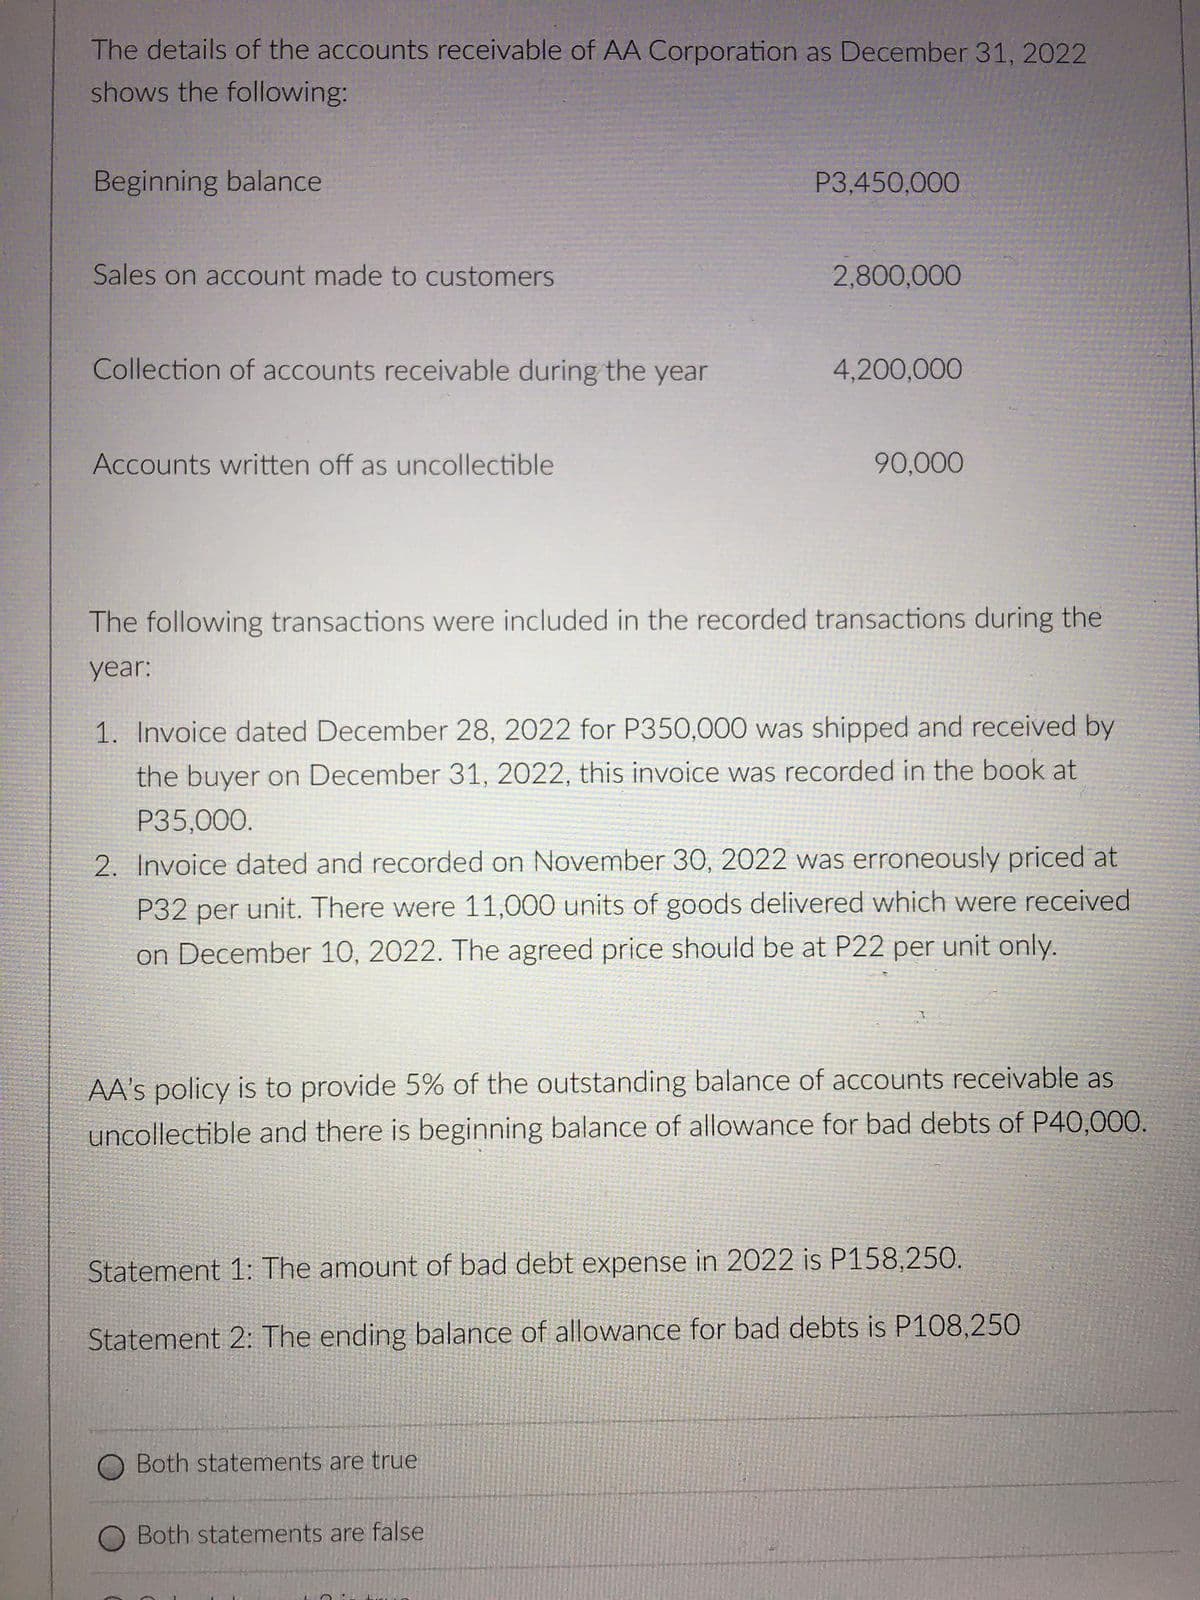 The details of the accounts receivable of AA Corporation as December 31, 2022
shows the following:
Beginning balance
P3,450,000
Sales on account made to customers
2,800,000
Collection of accounts receivable during the year
4,200,000
Accounts written off as uncollectible
90,000
The following transactions were included in the recorded transactions during the
year:
1. Invoice dated December 28, 2022 for P350,000 was shipped and received by
the buyer on December 31, 2022, this invoice was recorded in the book at
P35,000.
2. Invoice dated and recorded on November 30, 2022 was erroneously priced at
P32 per unit. There were 11,000 units of goods delivered which were received
on December 10, 2022. The agreed price should be at P22 per unit only.
AA's policy is to provide 5% of the outstanding balance of accounts receivable as
uncollectible and there is beginning balance of allowance for bad debts of P40,000.
Statement 1: The amount of bad debt expense in 2022 is P158,250.
Statement 2: The ending balance of allowance for bad debts is P108,250
Both statements are true
Both statements are false
